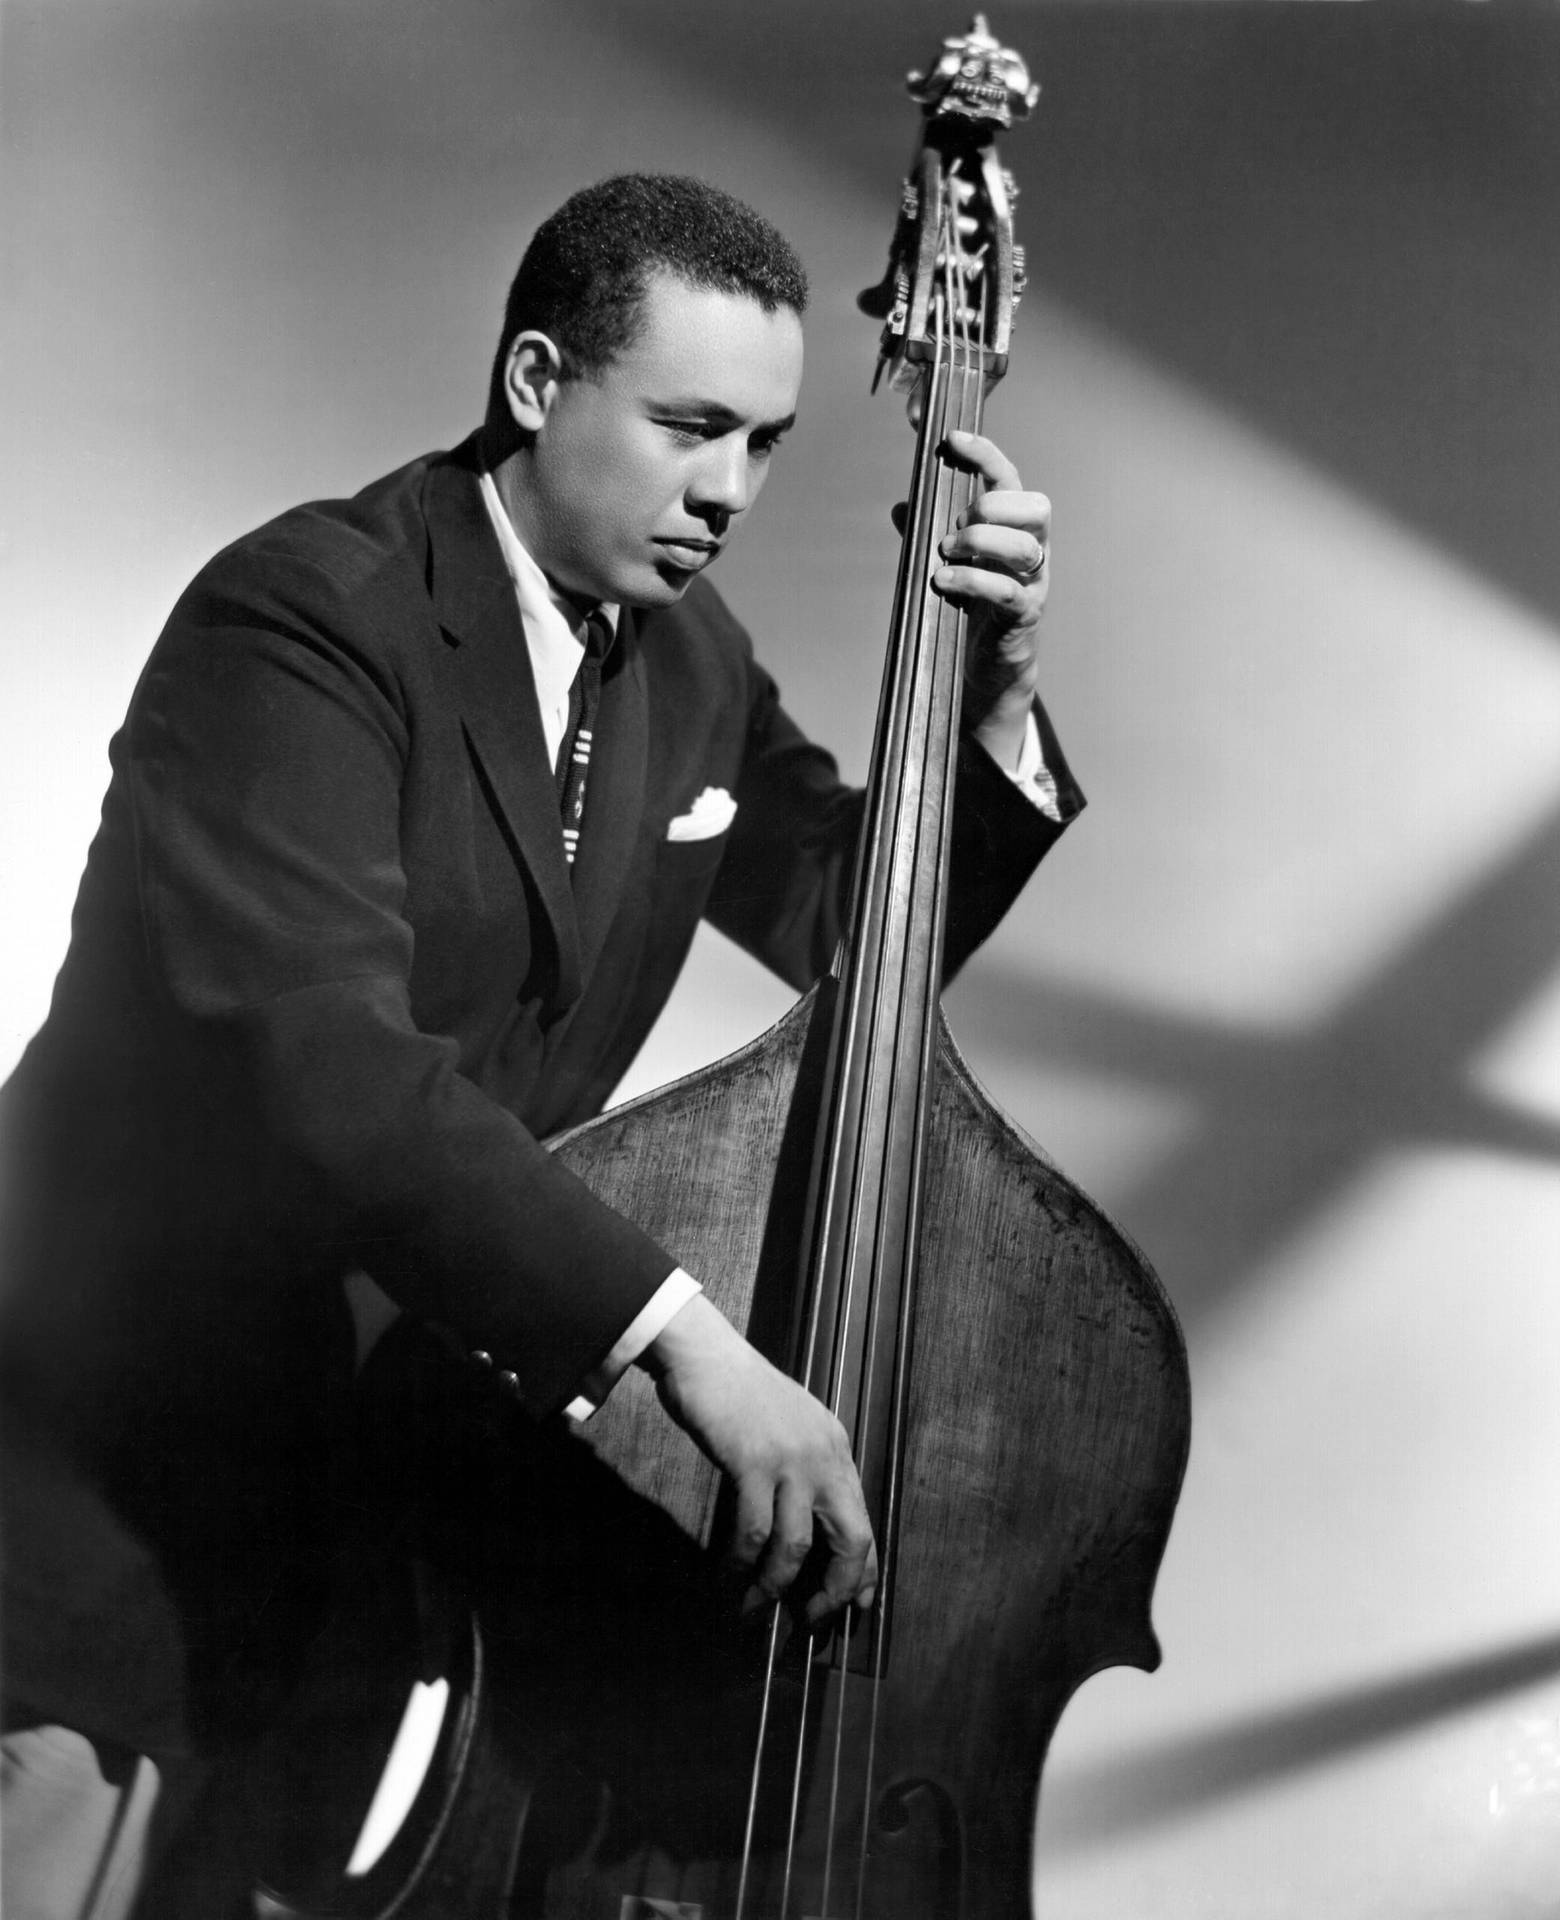 Caption: Charles Mingus, The Jazz Legend in Black and White Wallpaper